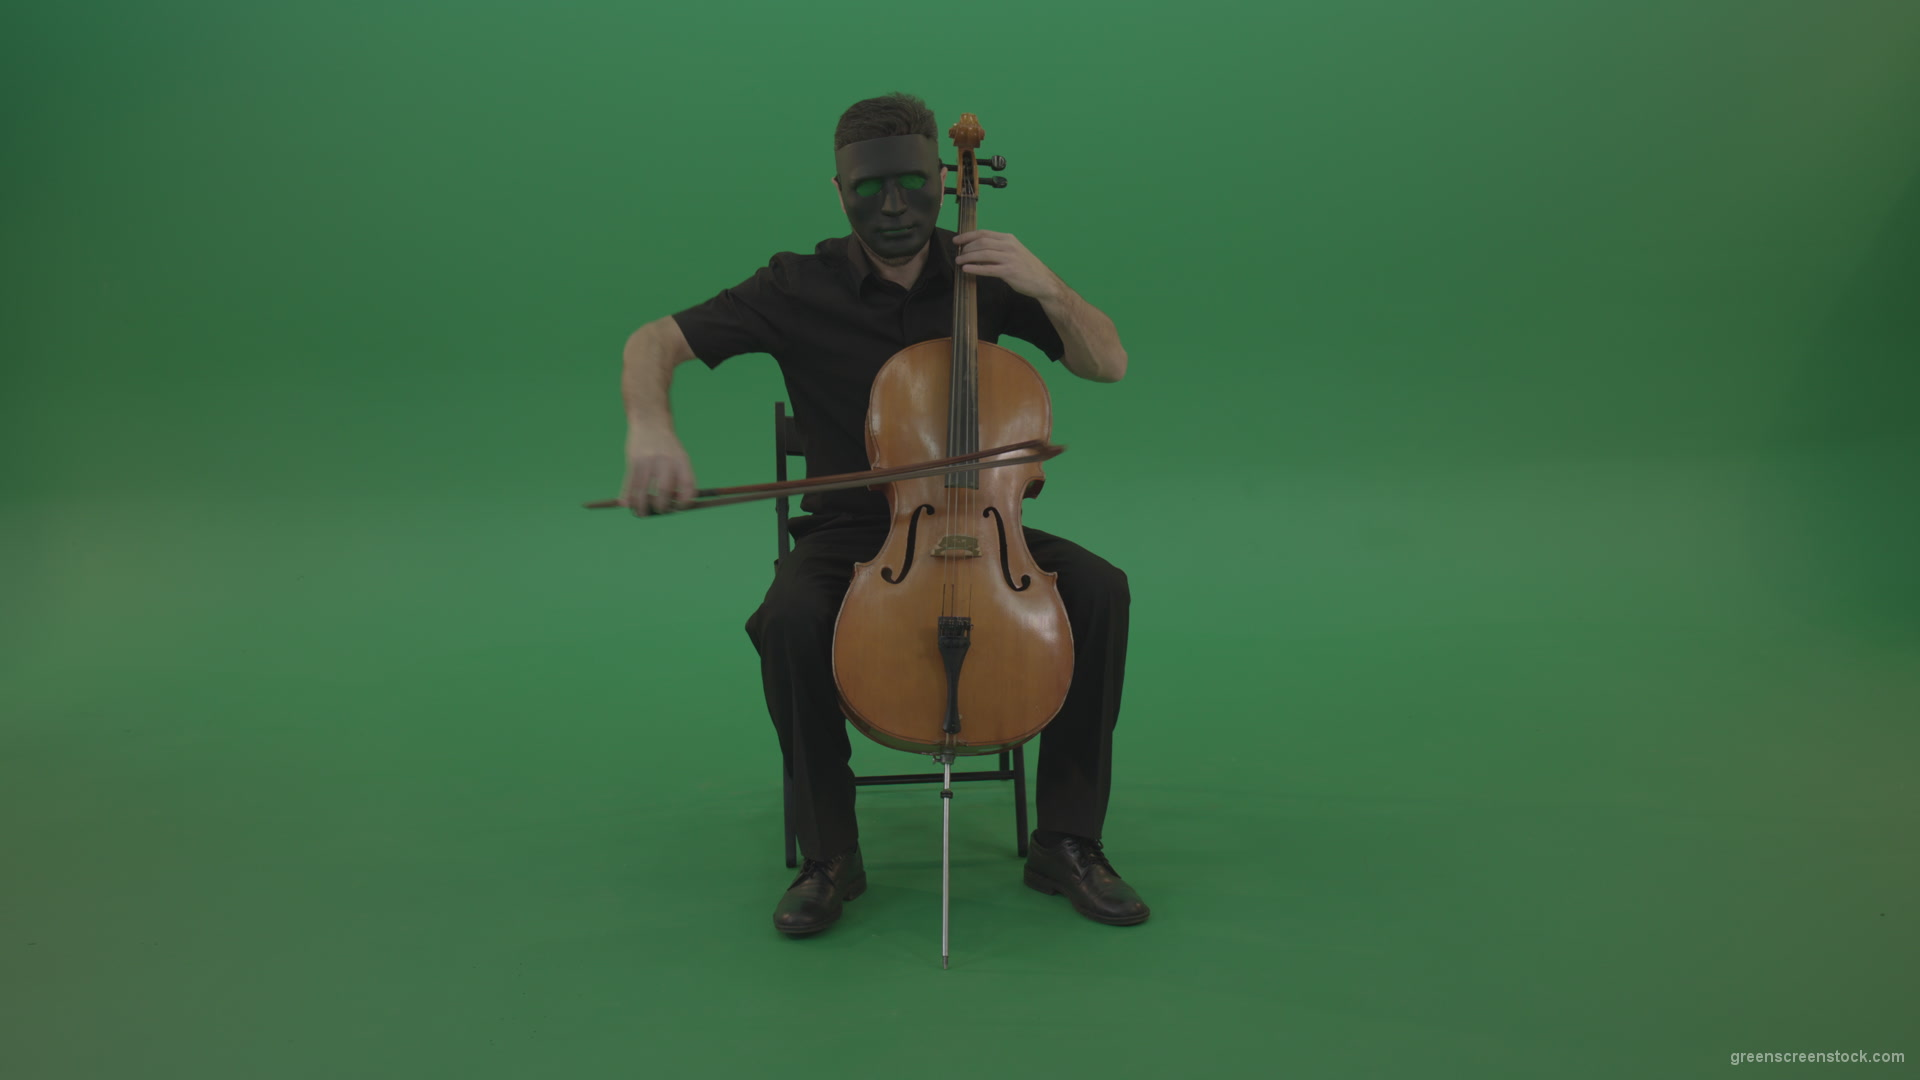 Full-size-man-in-black-wear-and-mask-play-violoncello-cello-strings-music-instrument-isolated-on-green-screen_006 Green Screen Stock